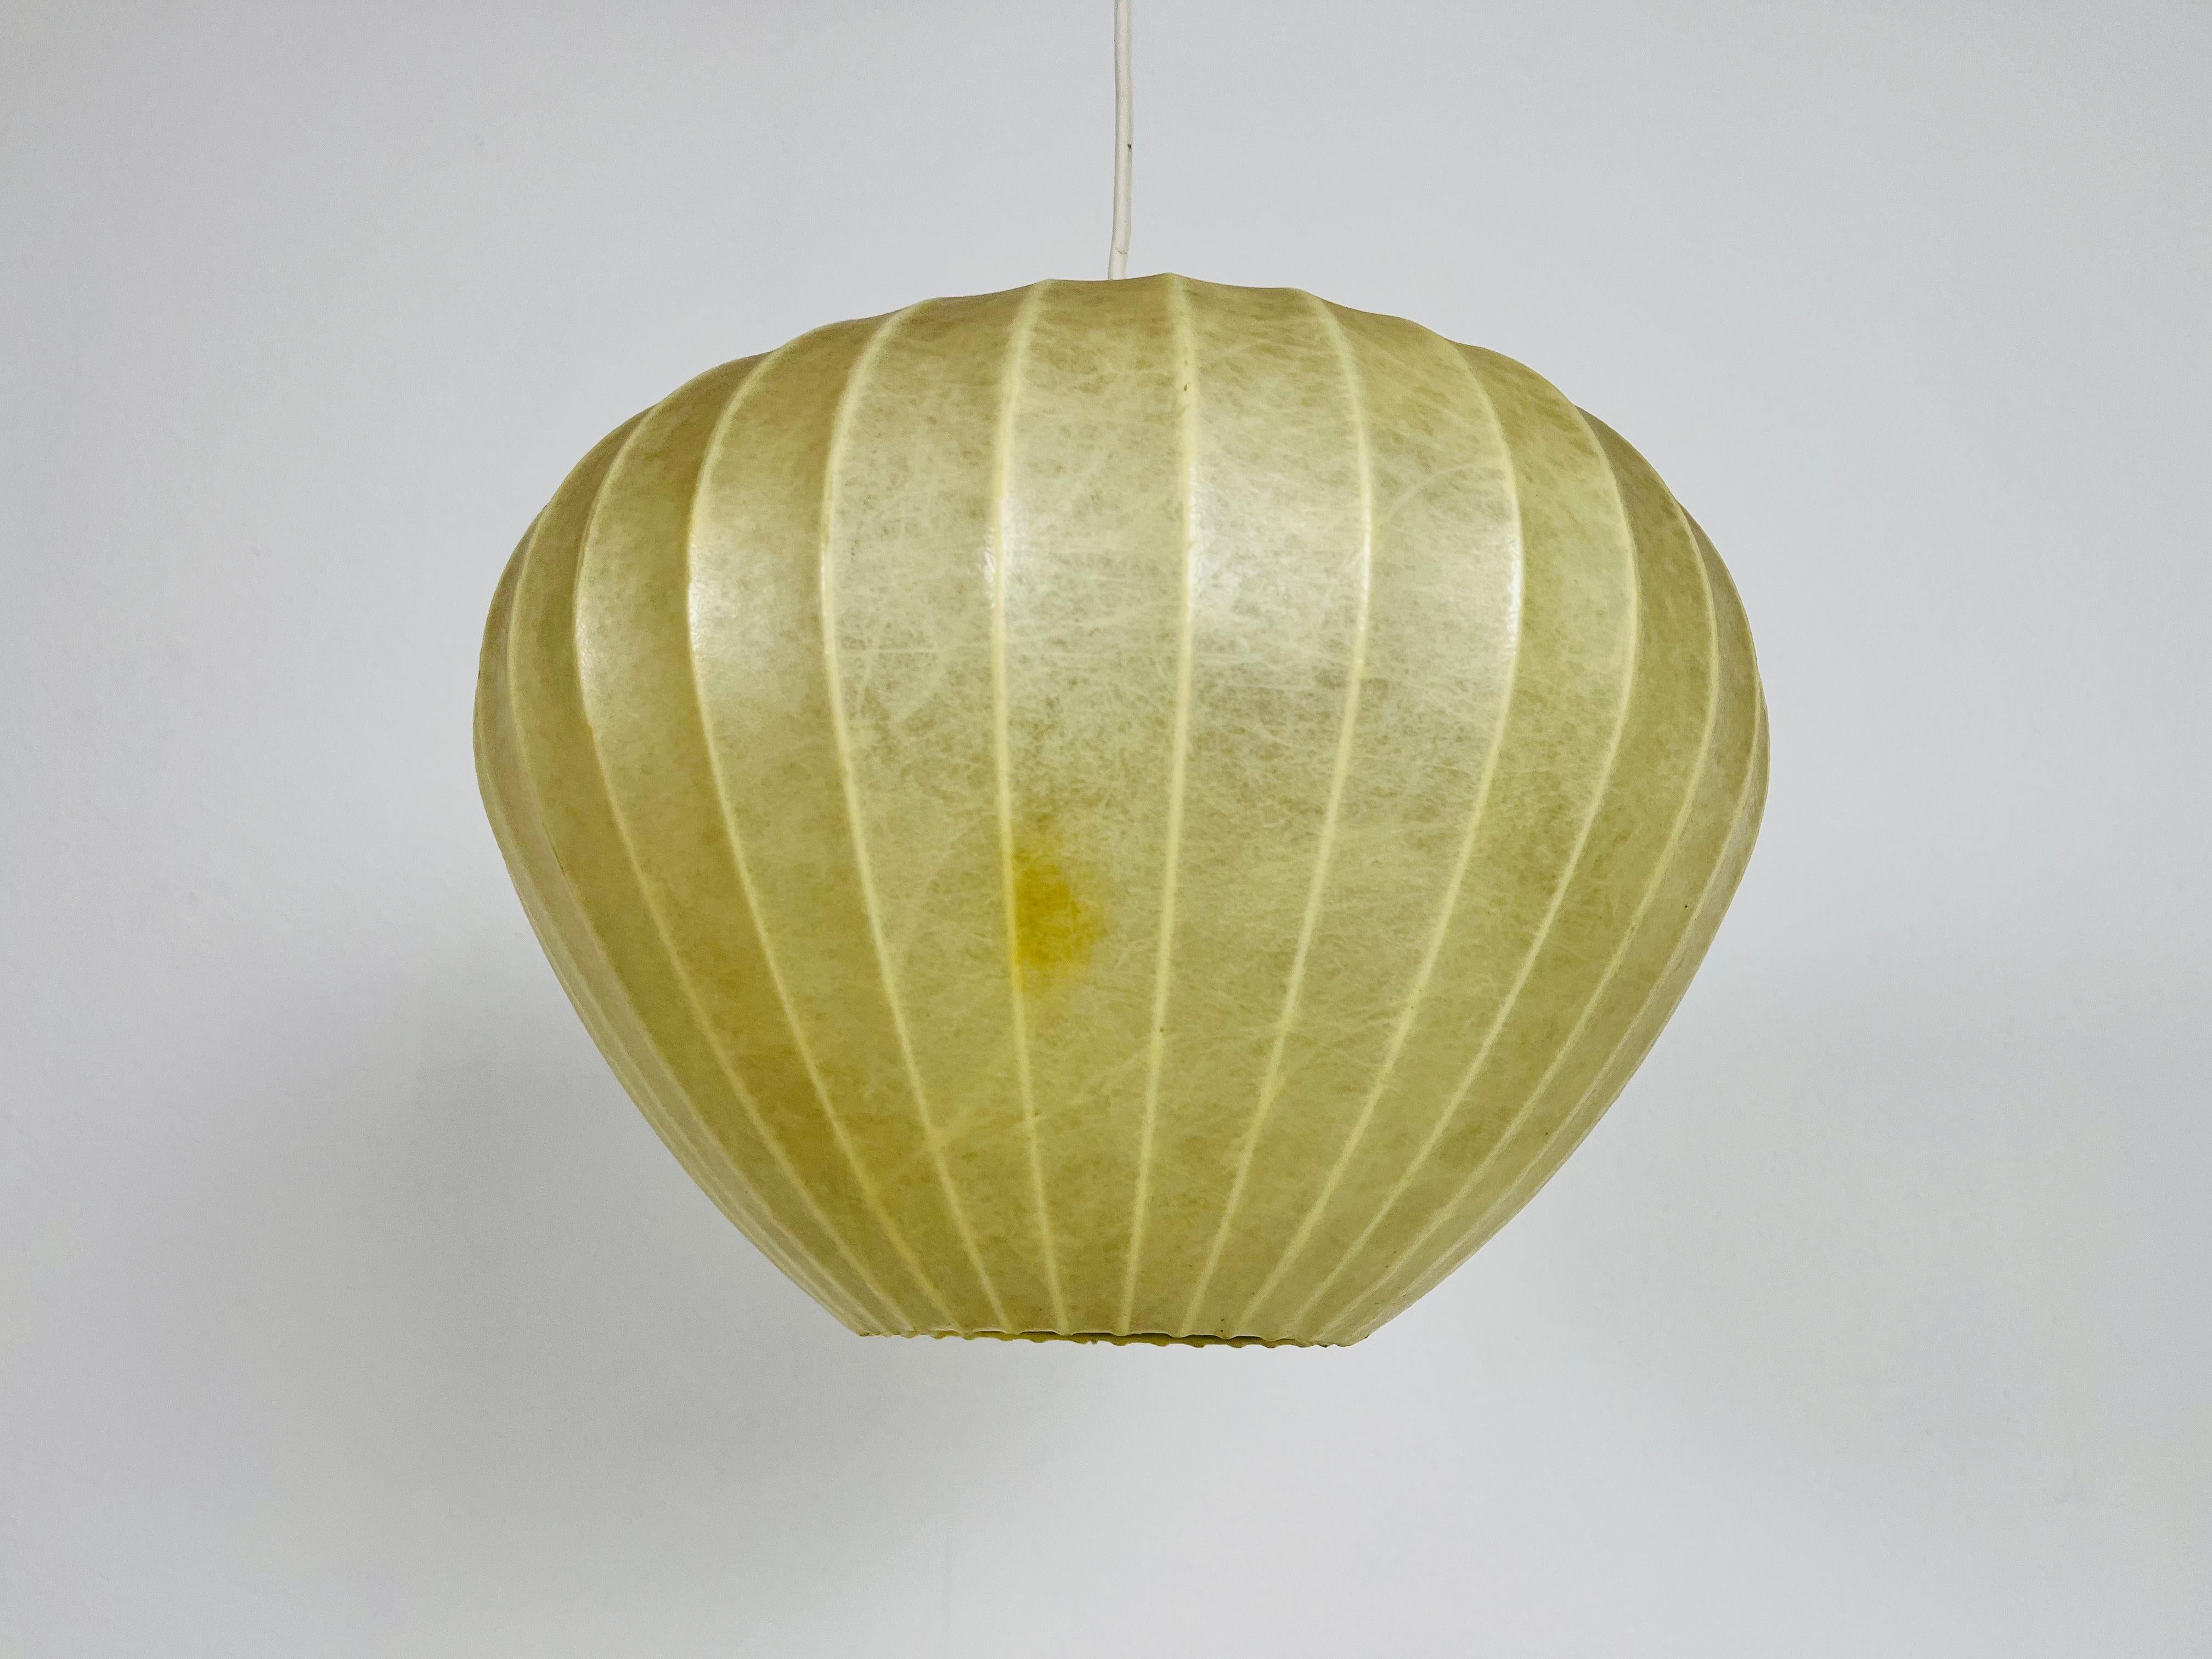 A cocoon pendant lamp made in Italy in the 1960s. The hanging lamp has been manufactured in the design of the lamps made by Achille Castiglioni. The lamp shade is of original cocoon and has an organic shape. 

Measures: Max height: 24-100